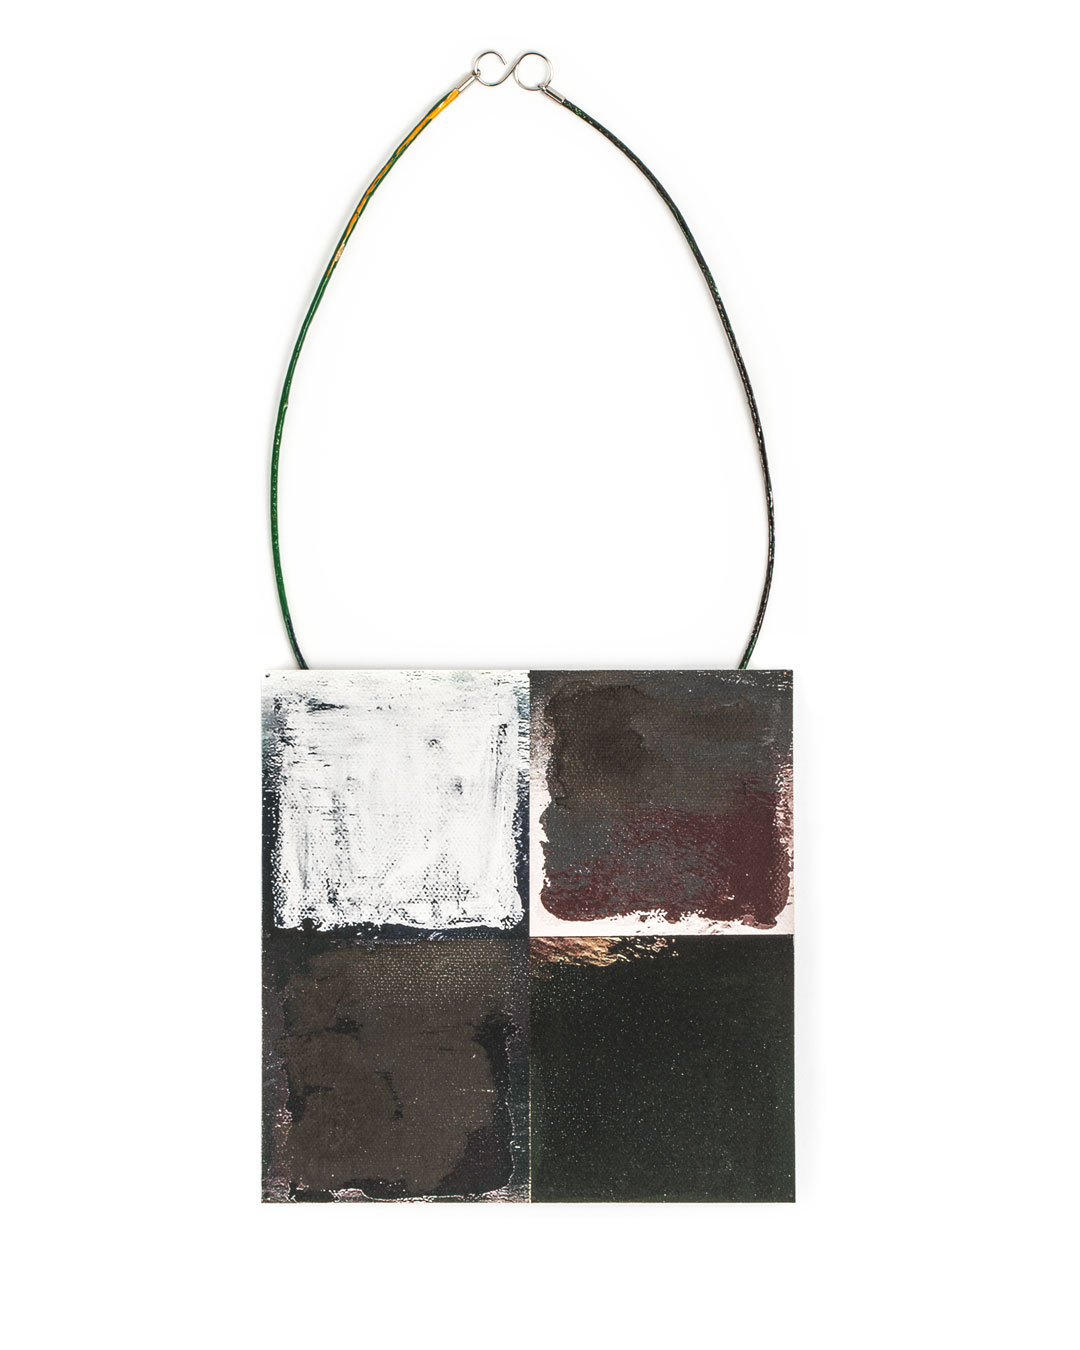 Robert Smit, untitled, 2019, necklace; canvas, ink, tinplate, cord, epoxy, silver, steel, 150 x 150 mm